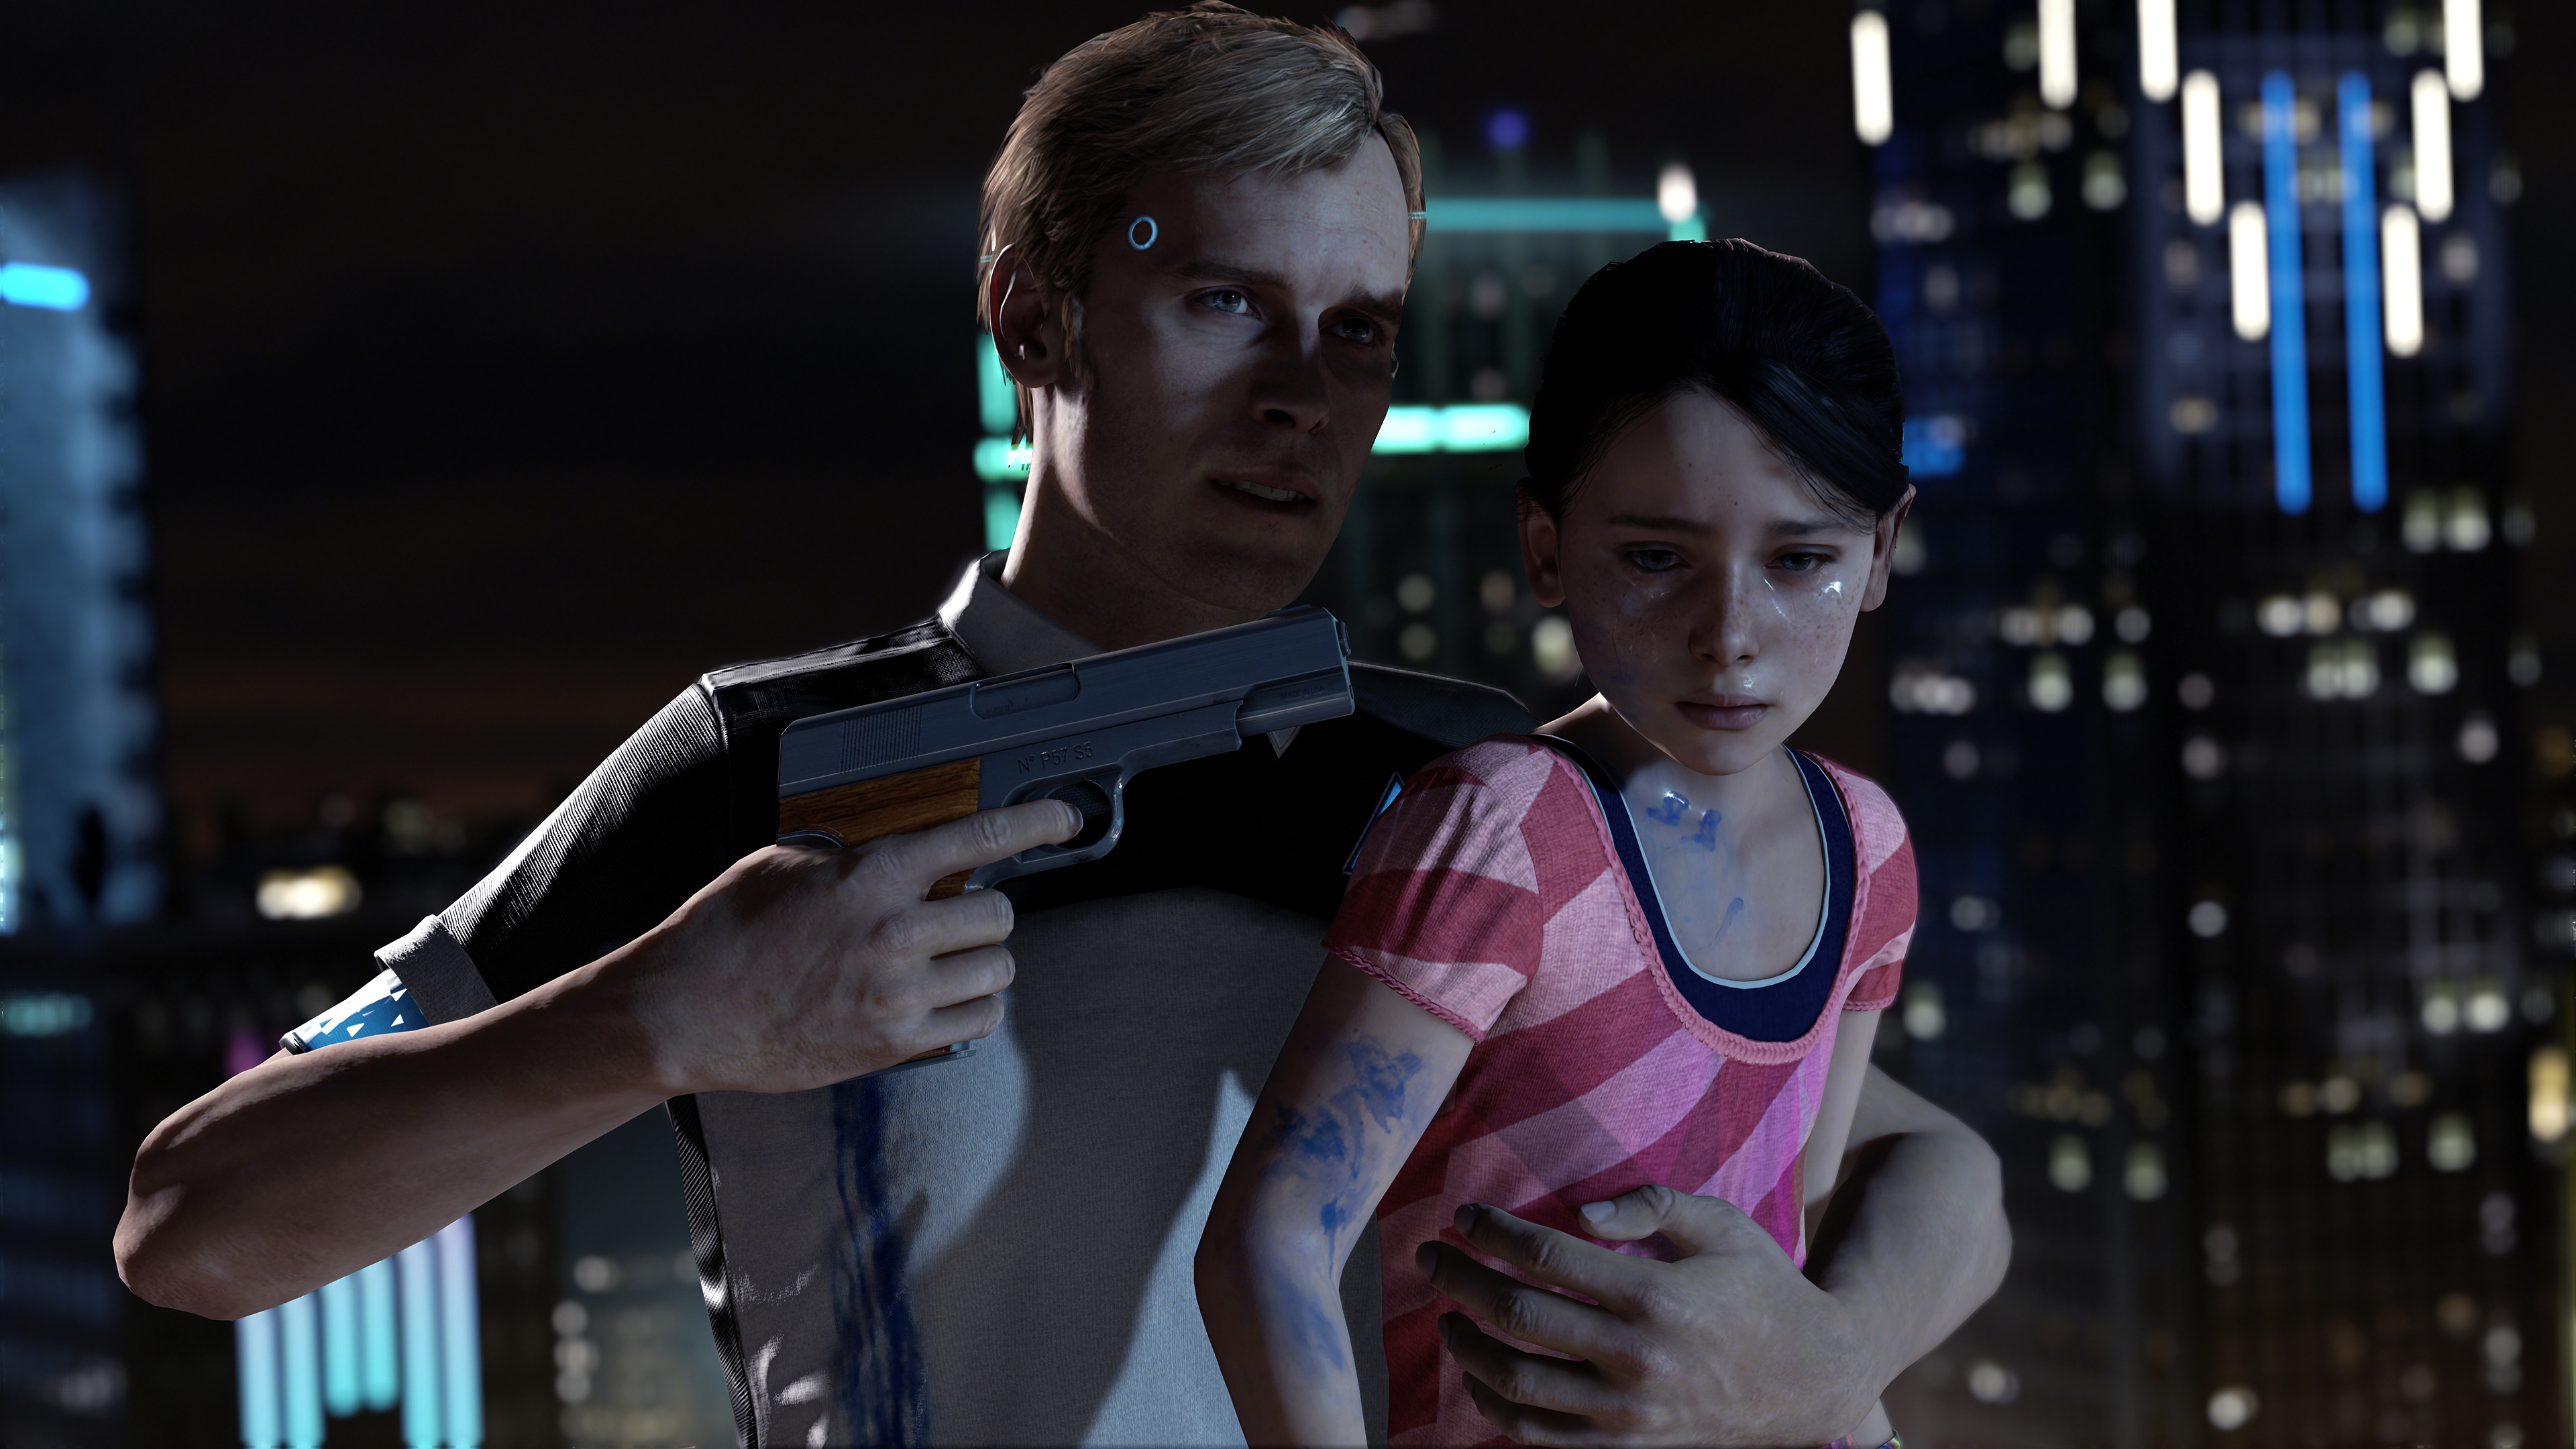 Video Game Detroit Become Human 3840x2160